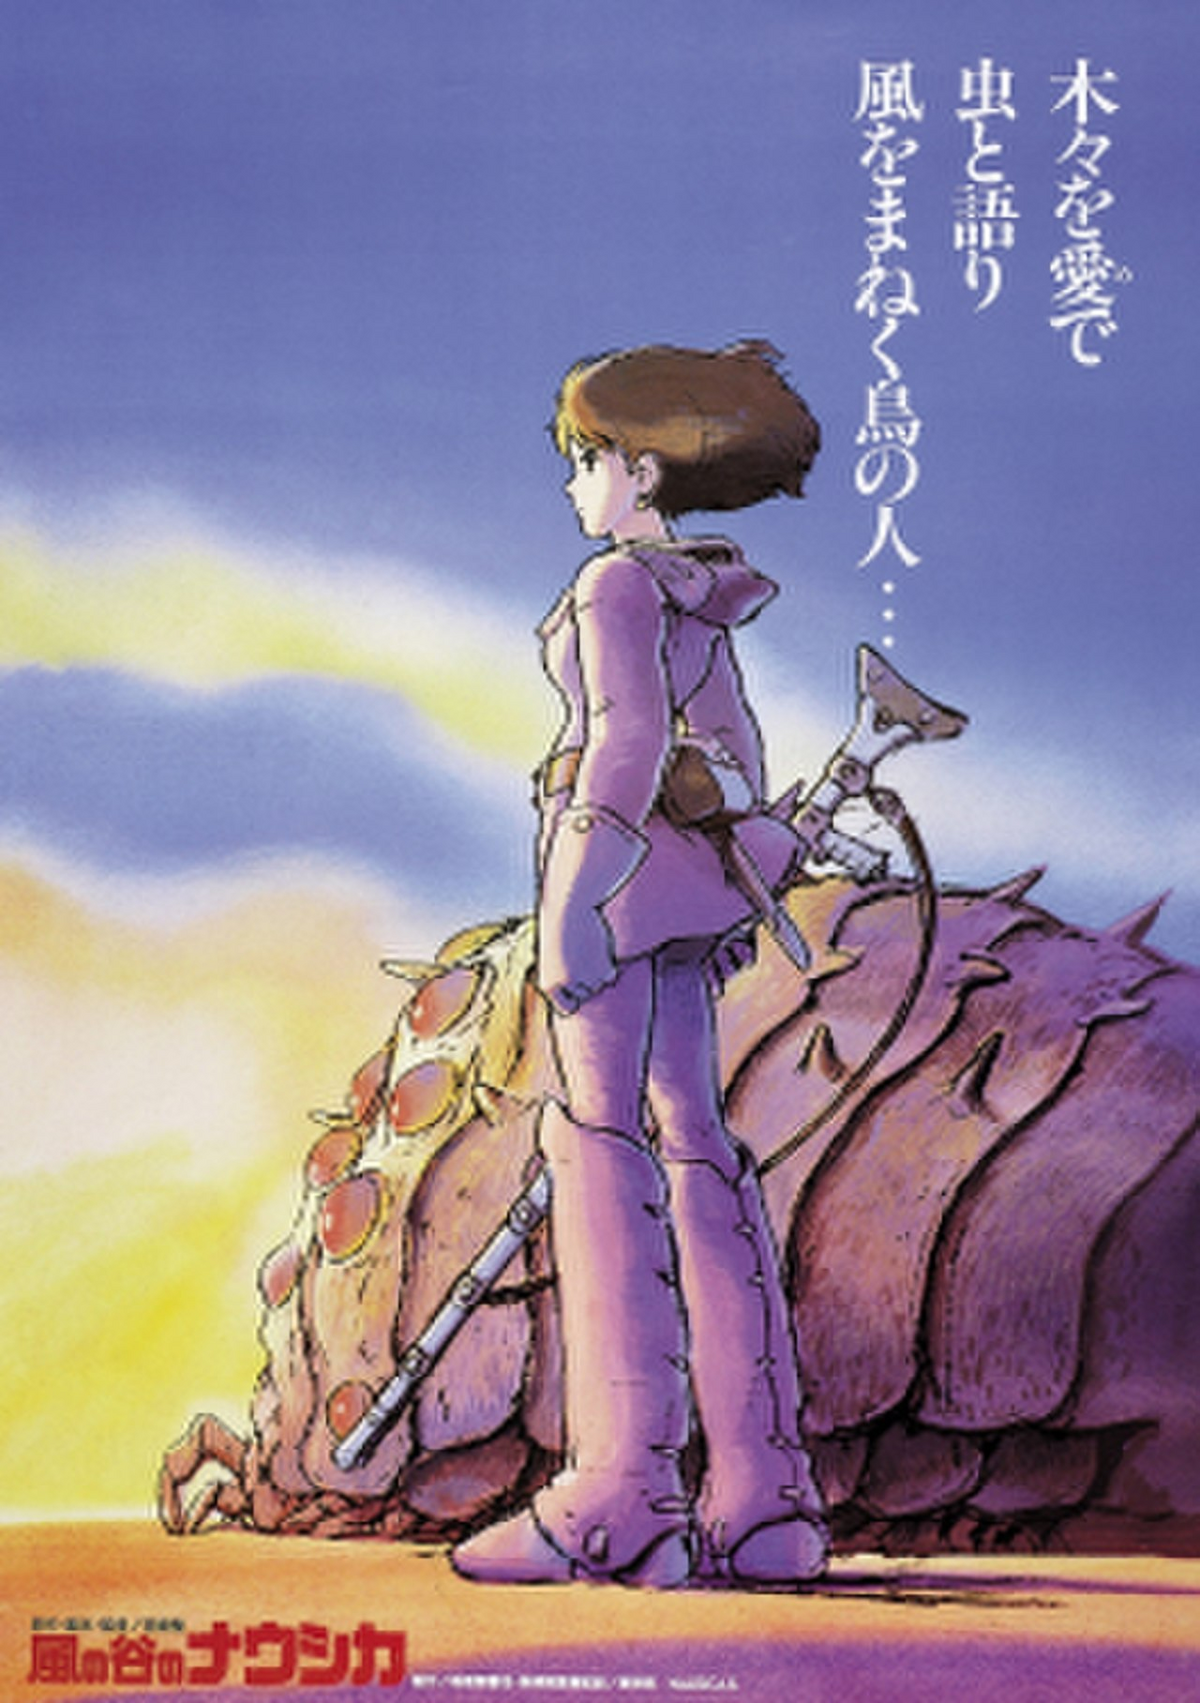 Nausicaä of the Valley of the Wind (1984) | Soundeffects Wiki | Fandom